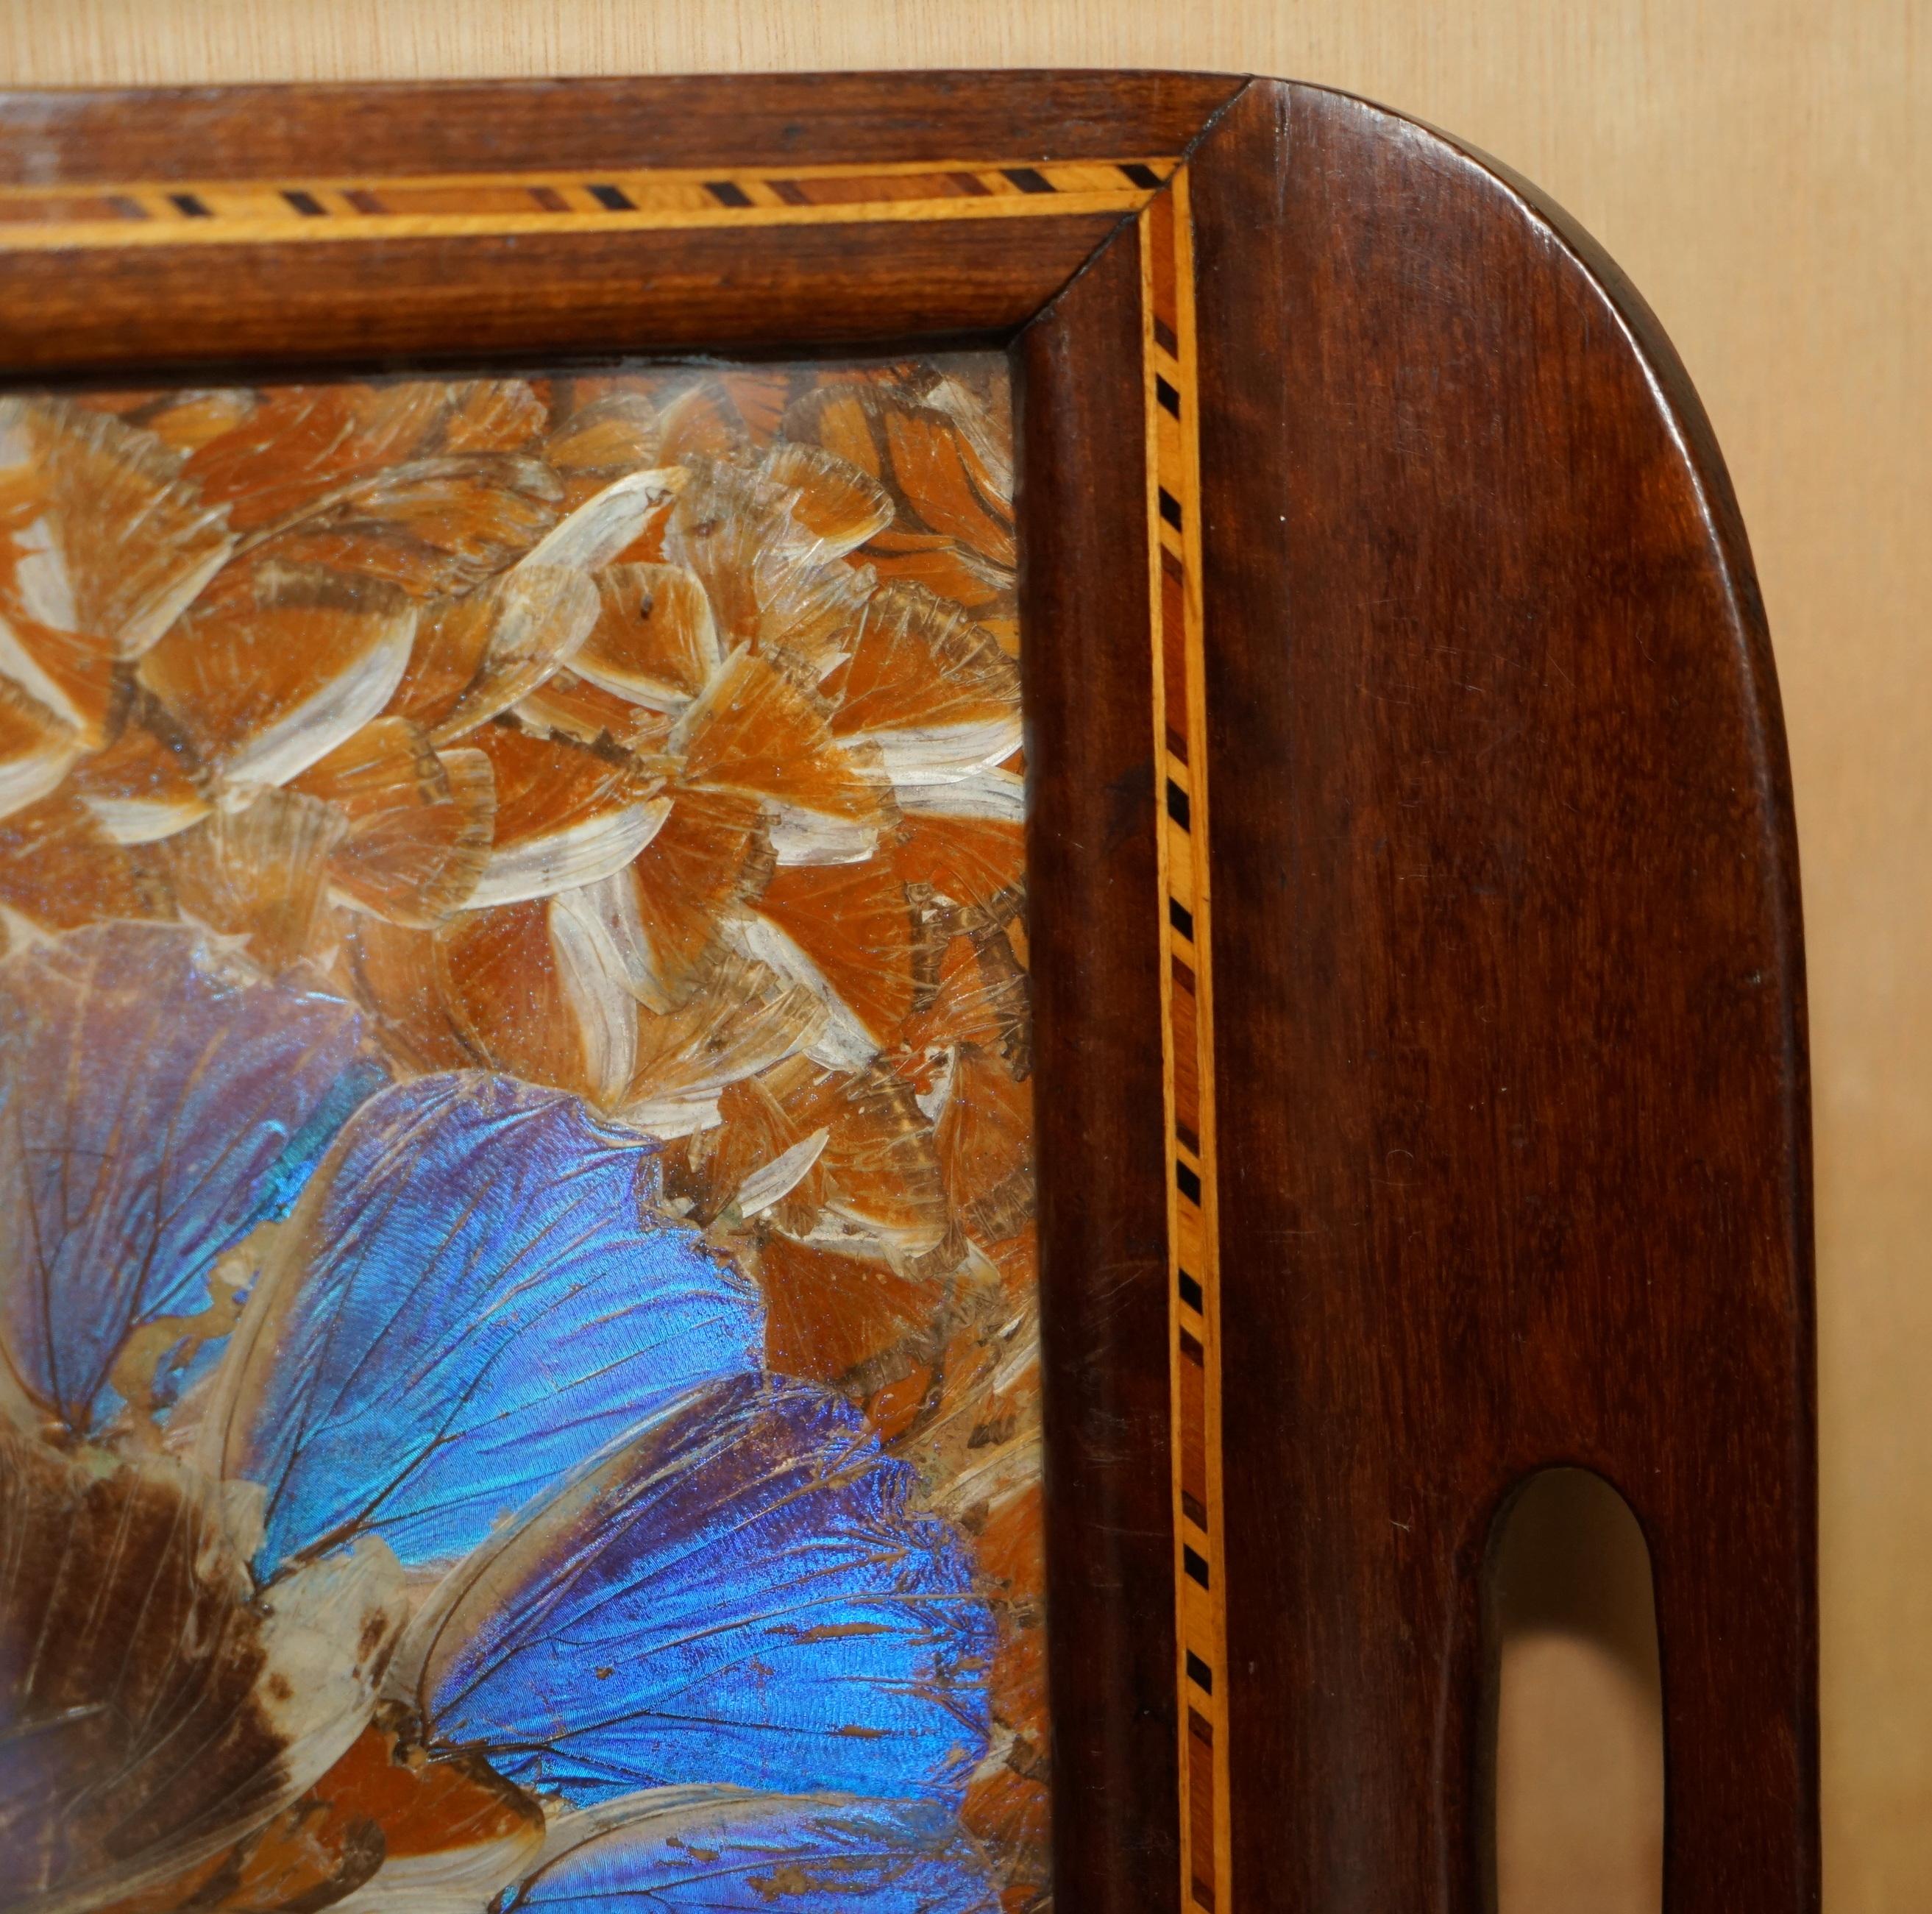 EXQUiSITE RIO DE JANEIRO BRAZILIAN HARDWOOD BUTTERFLY WING BUTLERS SERVING TRAY For Sale 7